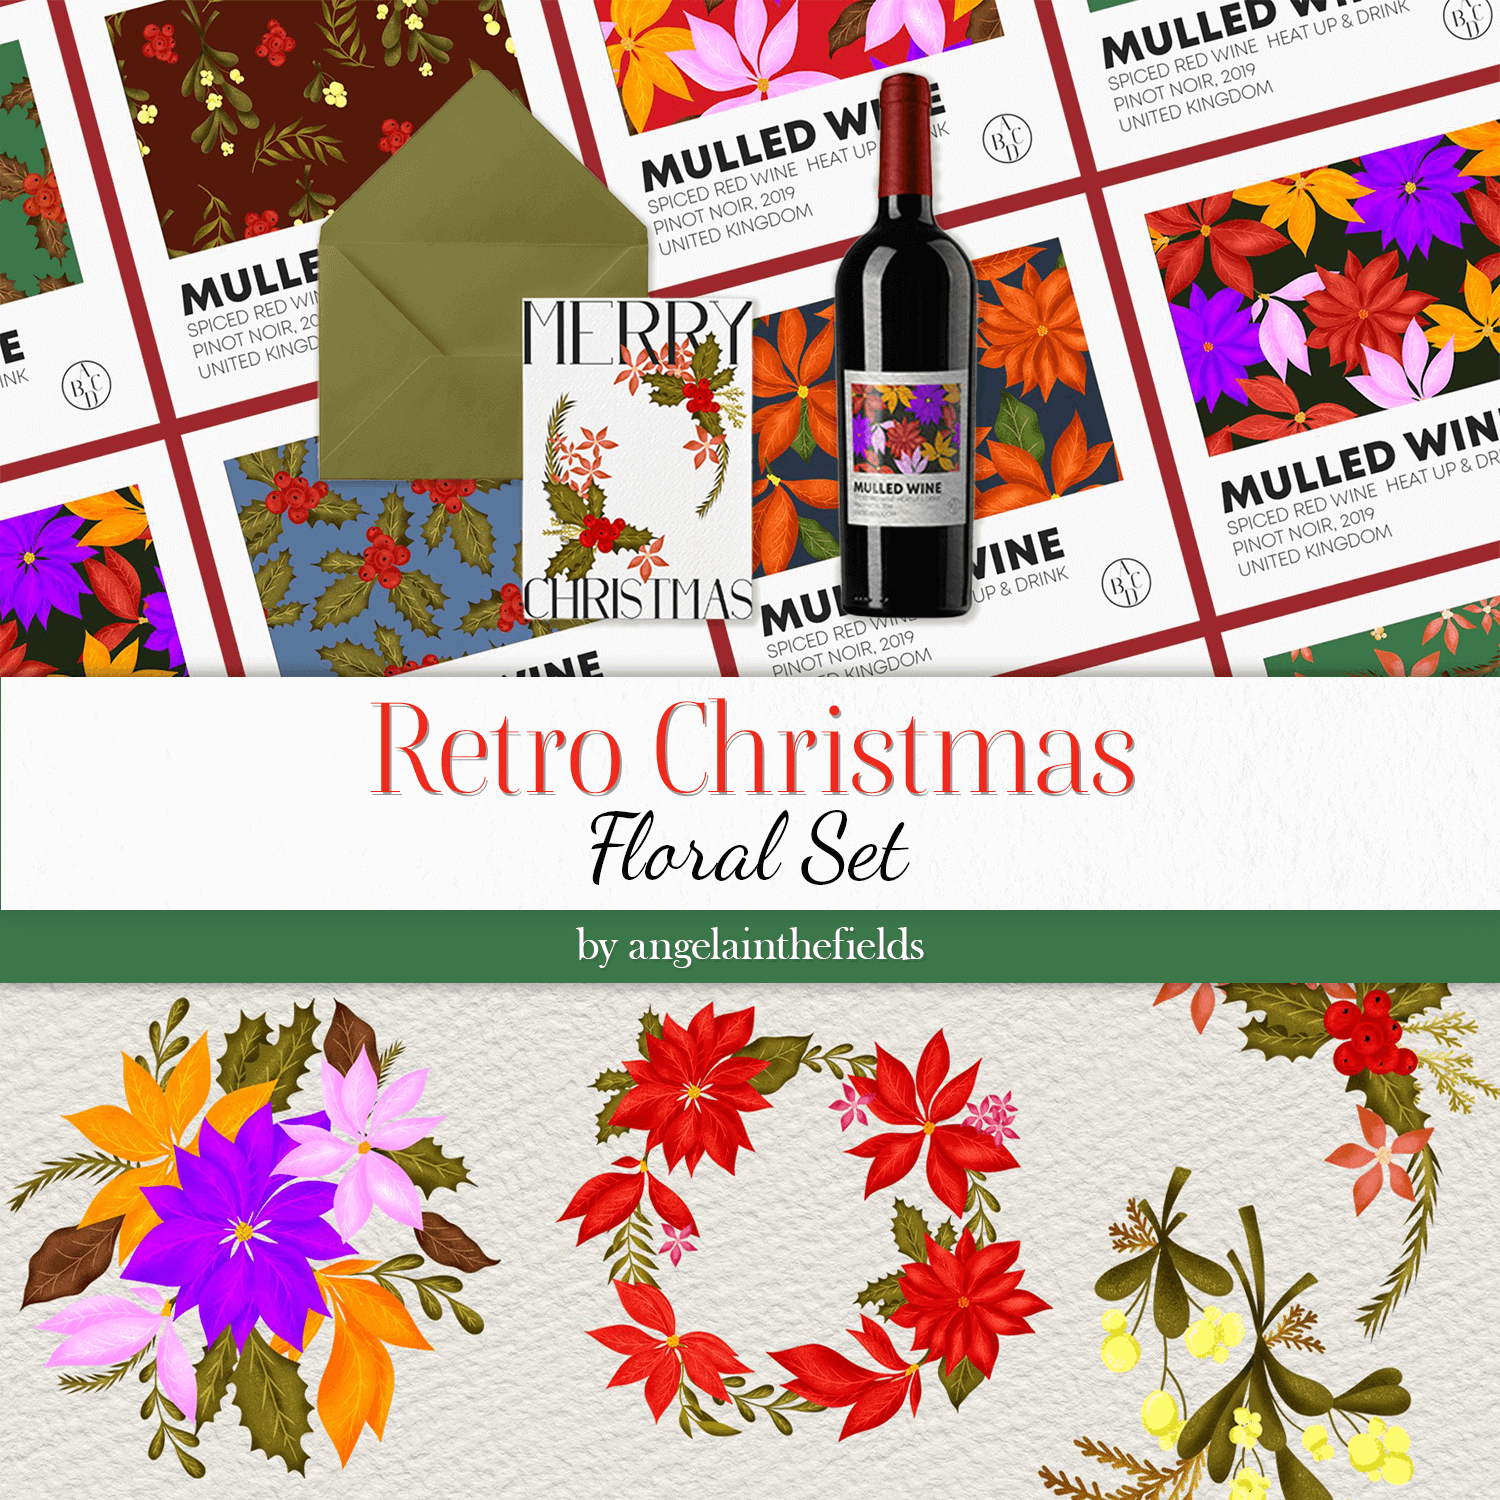 Retro Christmas floral set and bottle of wine on holiday card.